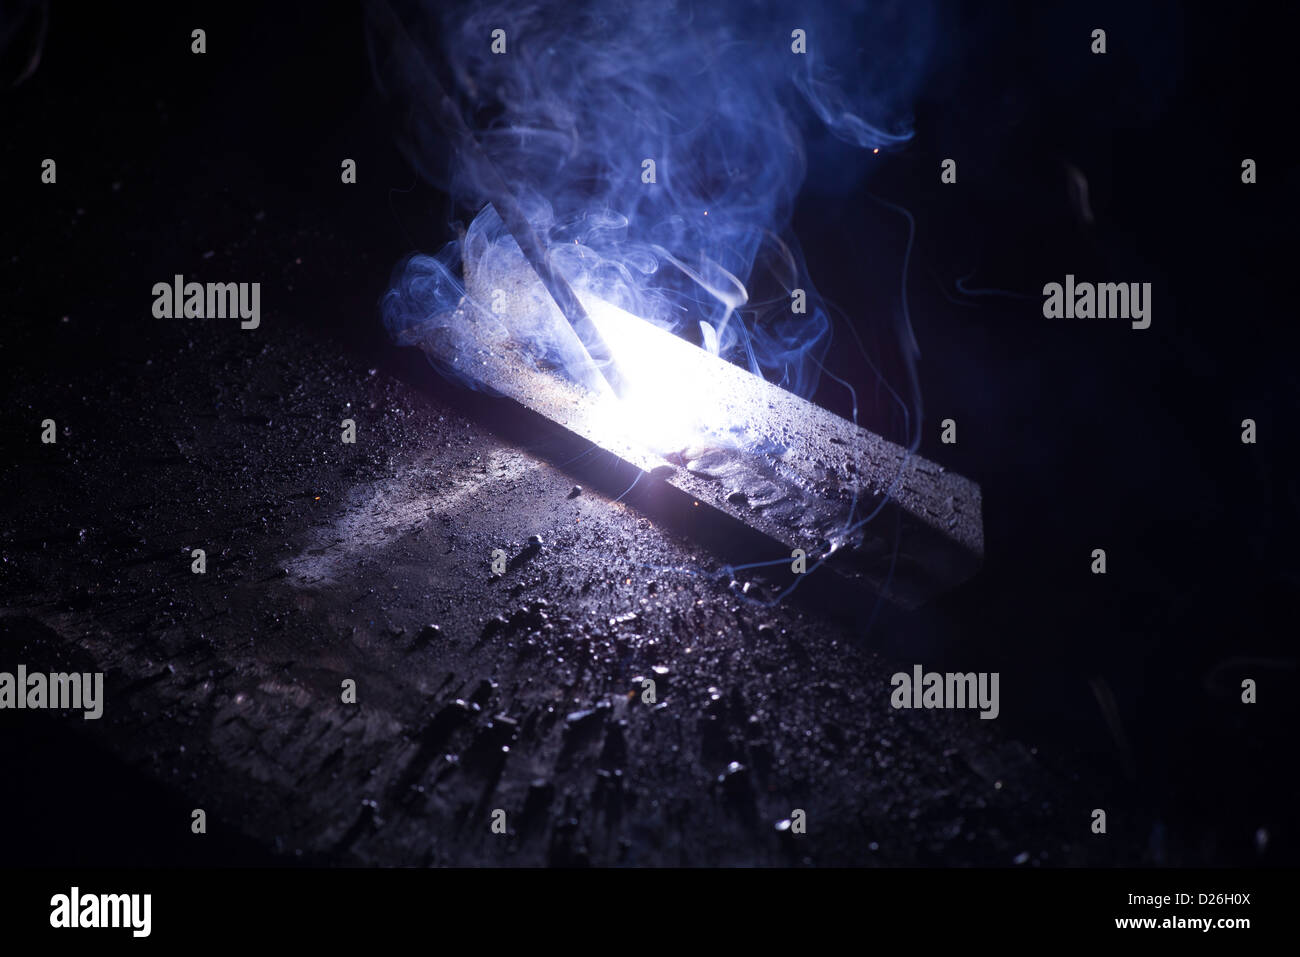 The industrial process of MMA Stick welding used in boatyards, shipbuilding, heavy industry, fabrication of steel Stock Photo